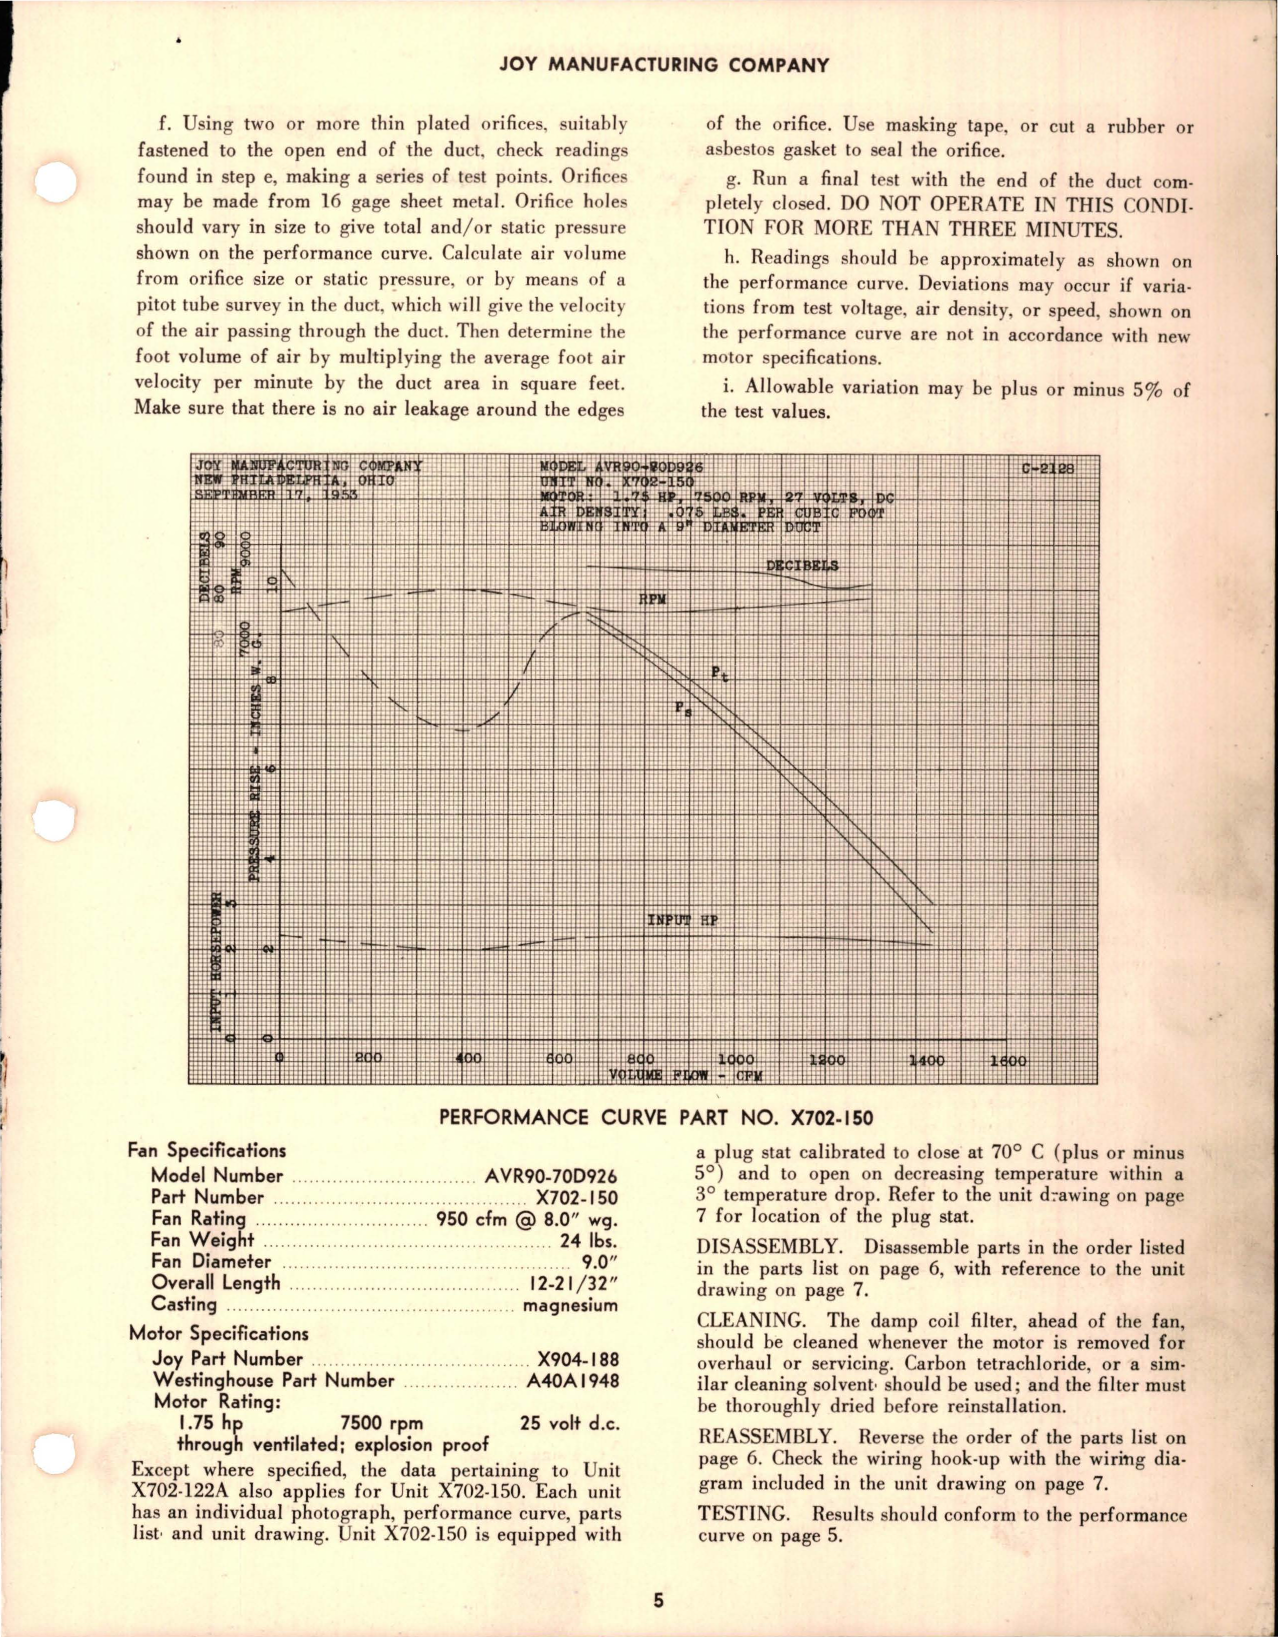 Sample page 5 from AirCorps Library document: Overhaul Instructions with Parts Breakdown for Axivane Aircraft Fans